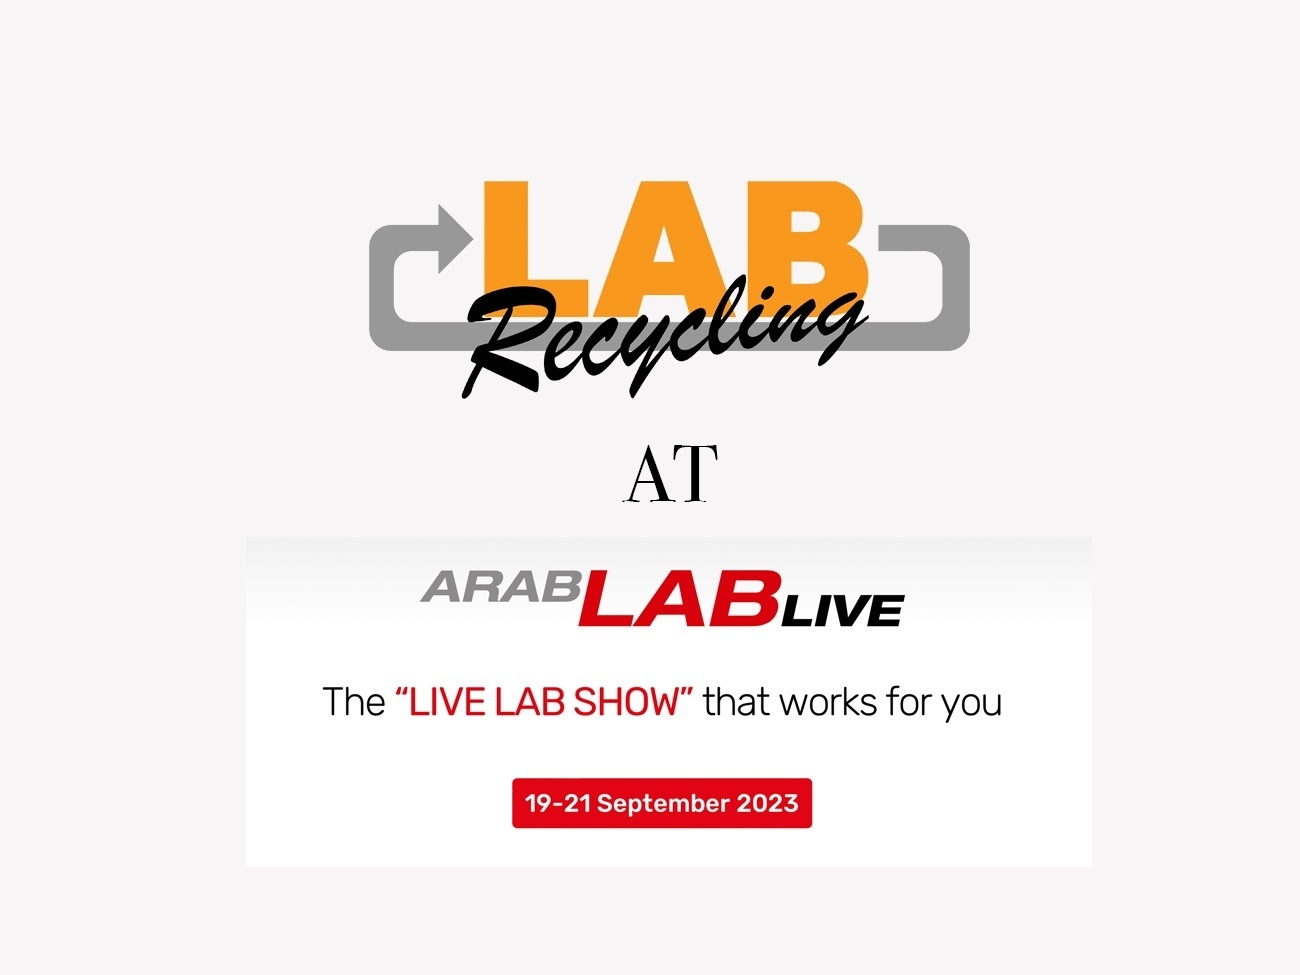 Labrecycling staat op Arablab 2023